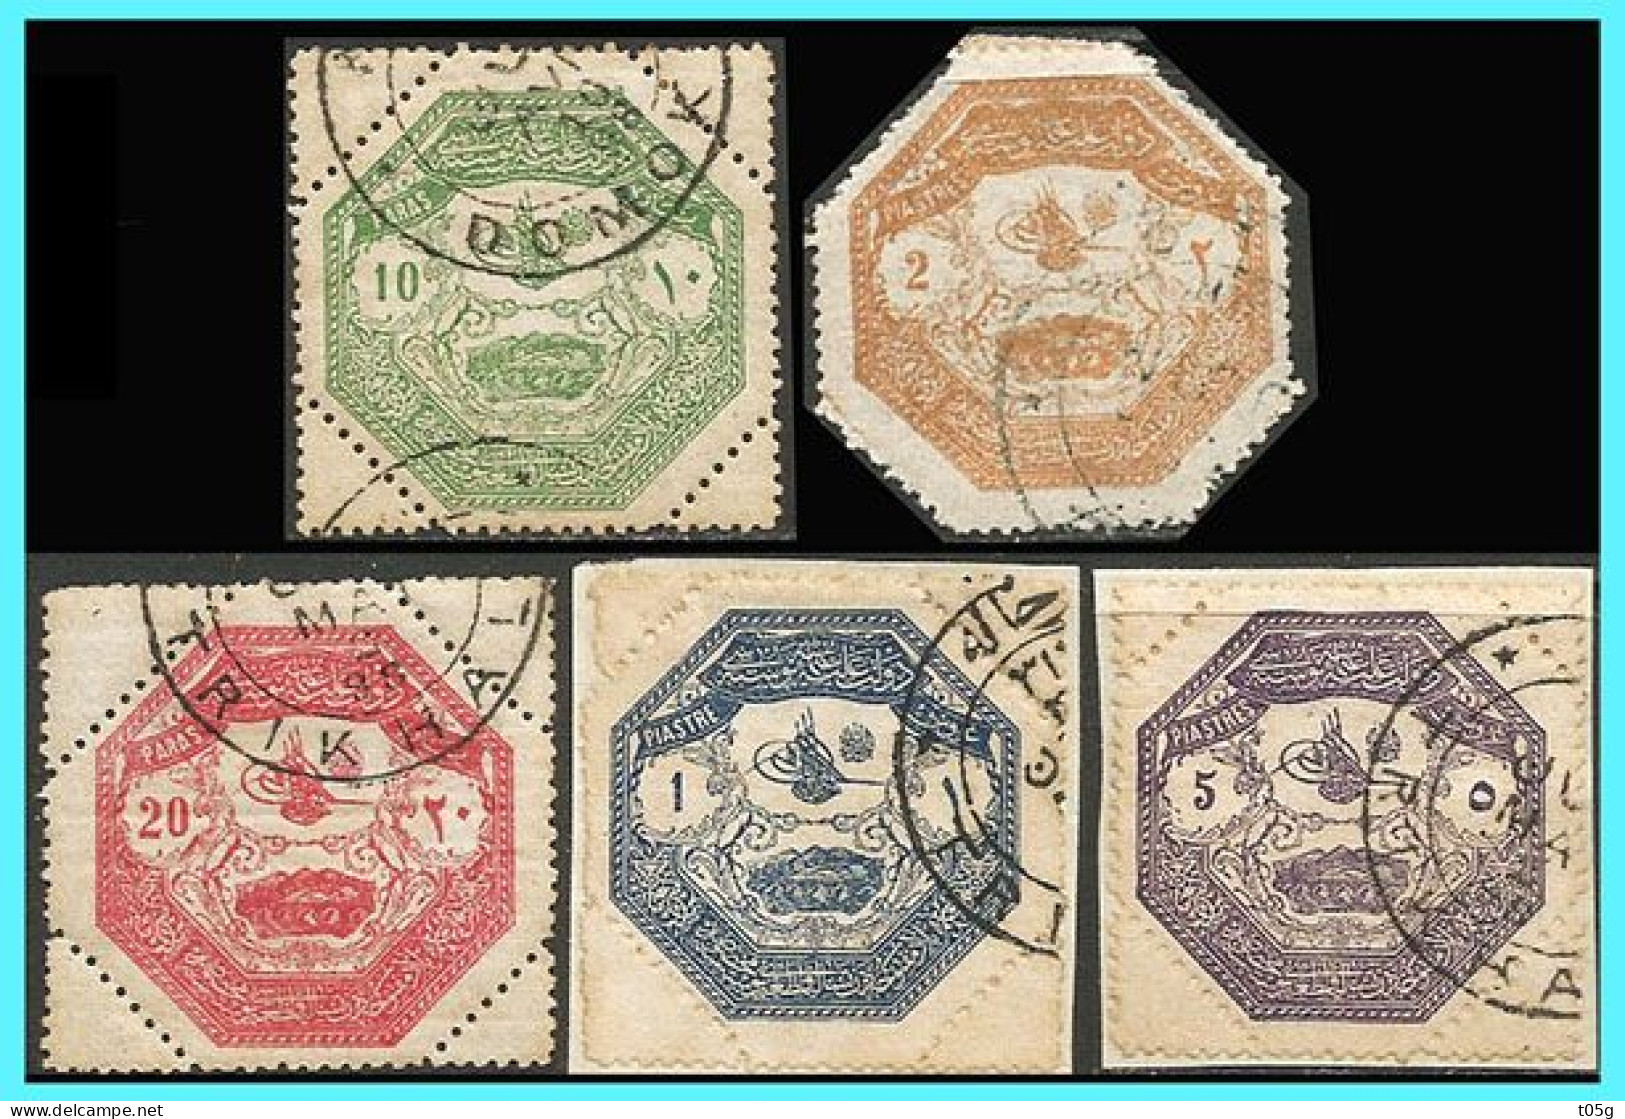 GREECE-GRECE-THESSALY- 1898:  Thessaly Compl. Set Used - Tessaglia